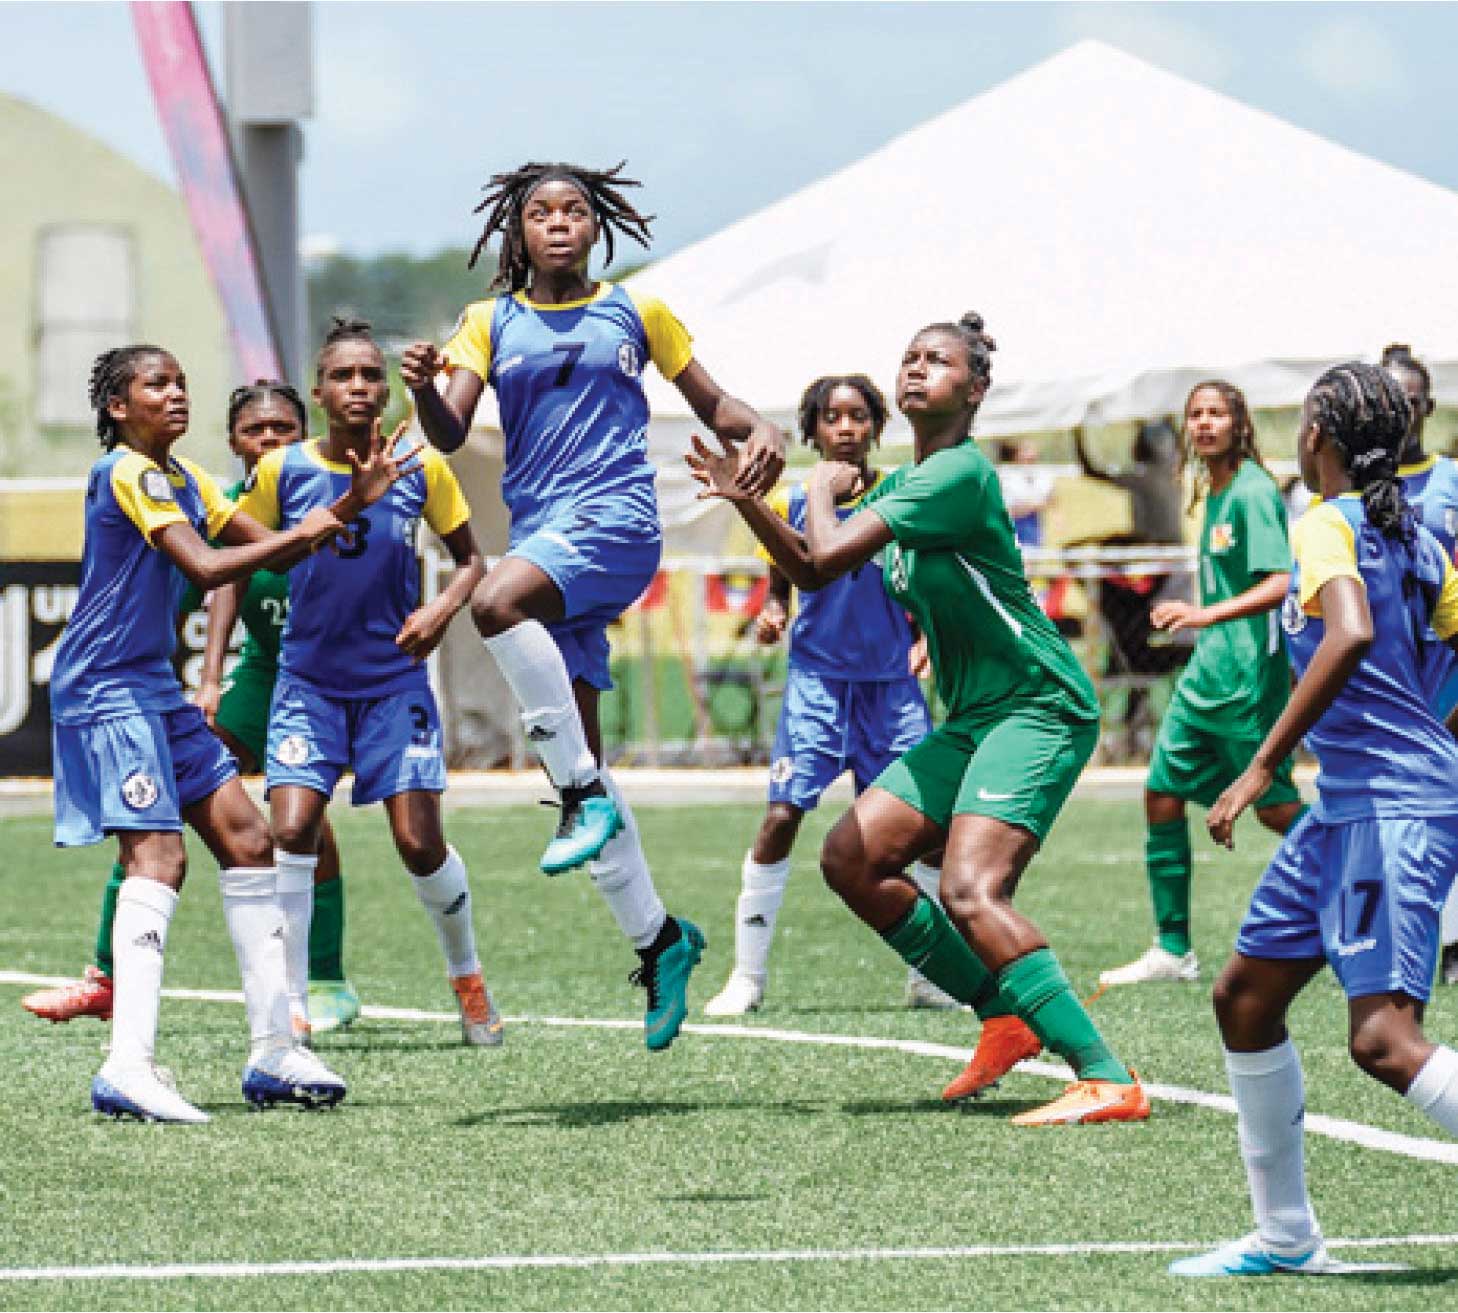 Team Saint Lucia (blue and yellow outfit) in an offensive mode versus Guadeloupe 